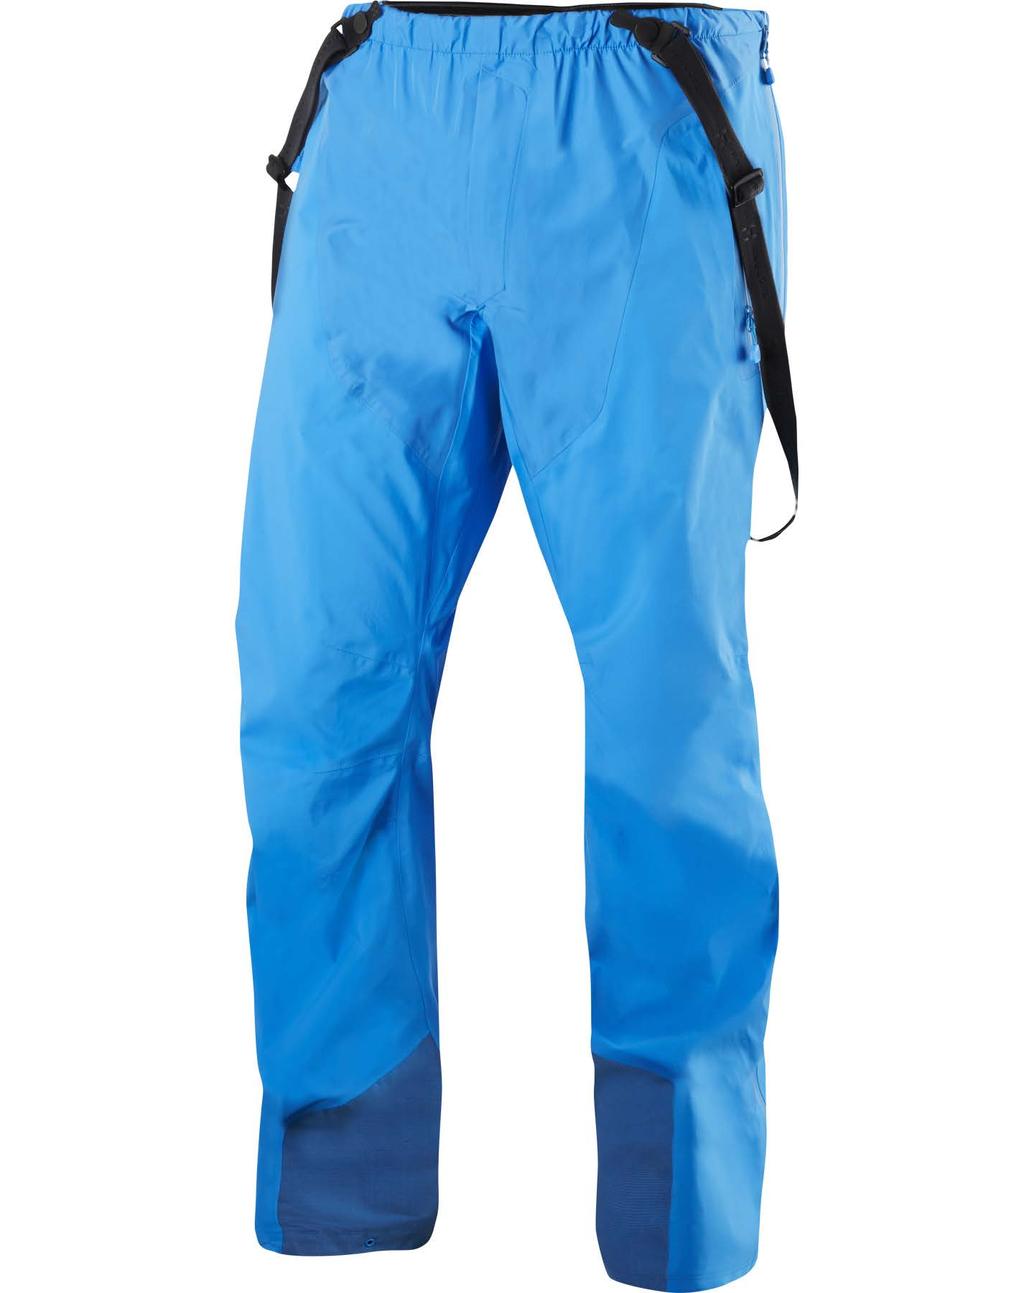 ROC II PANT Highly versatile mountain pant made from new Gore-Tex Pro technology.